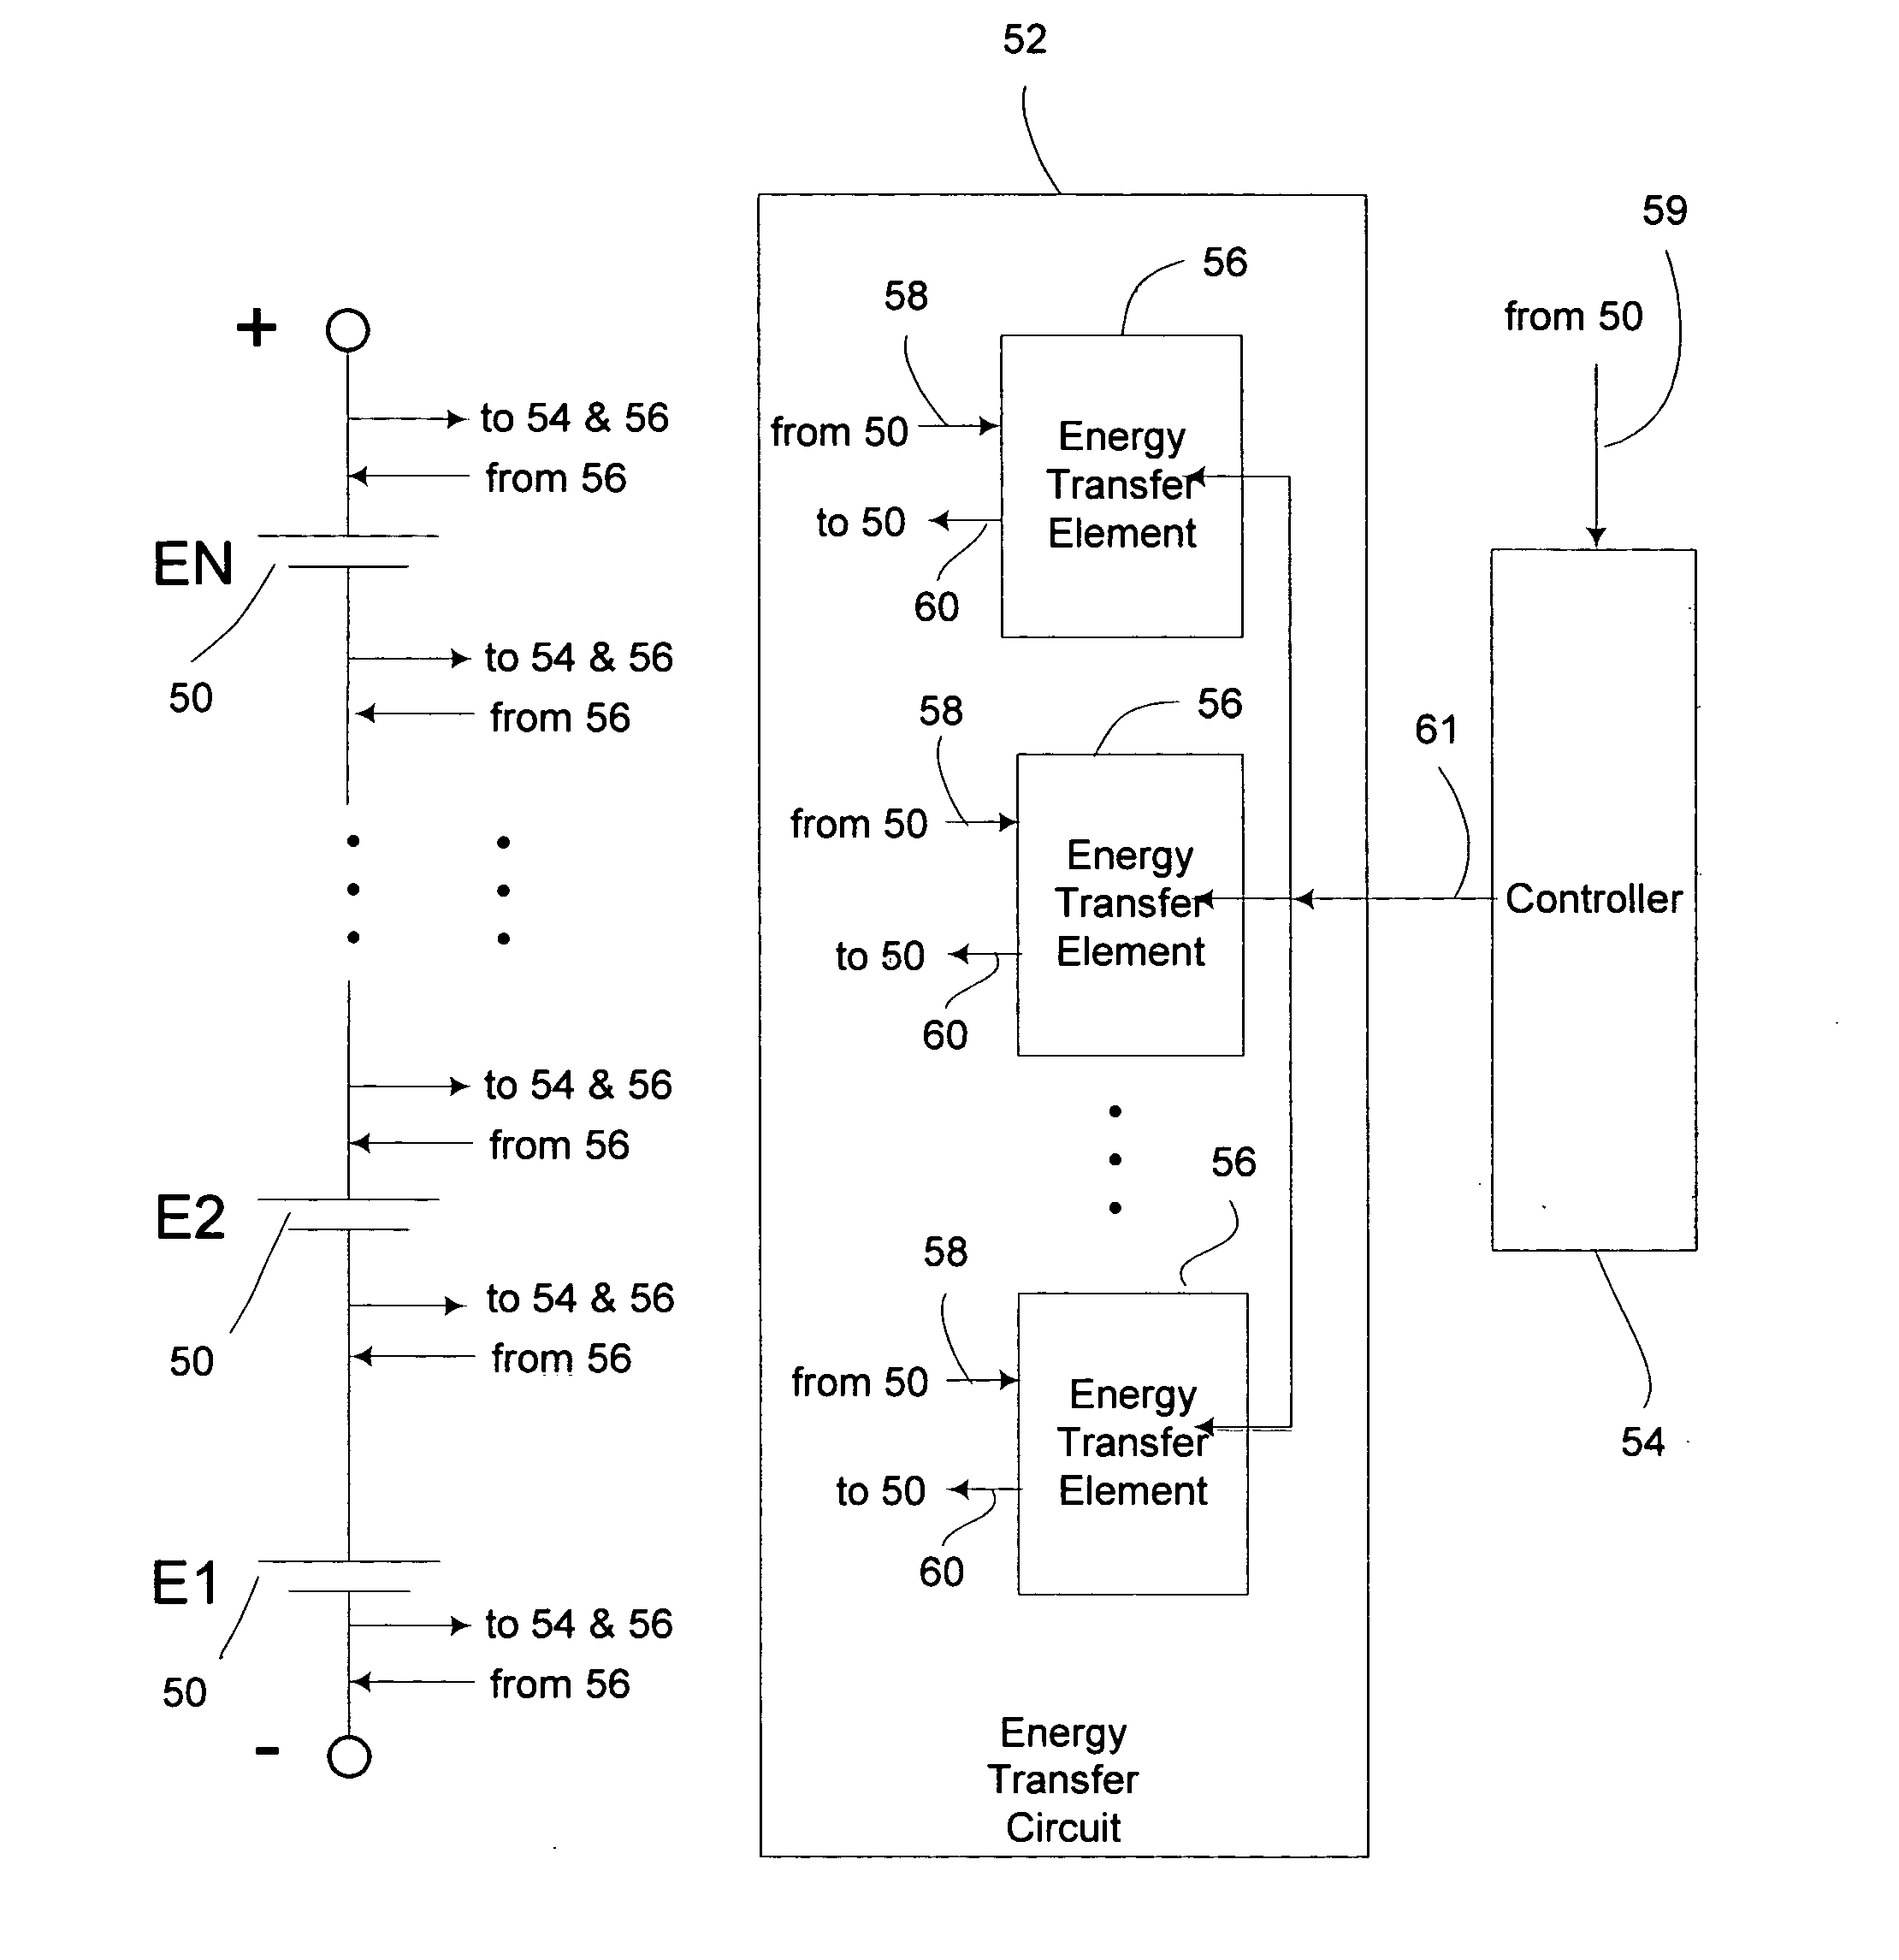 Energy transfer device for series connected energy source and storage devices